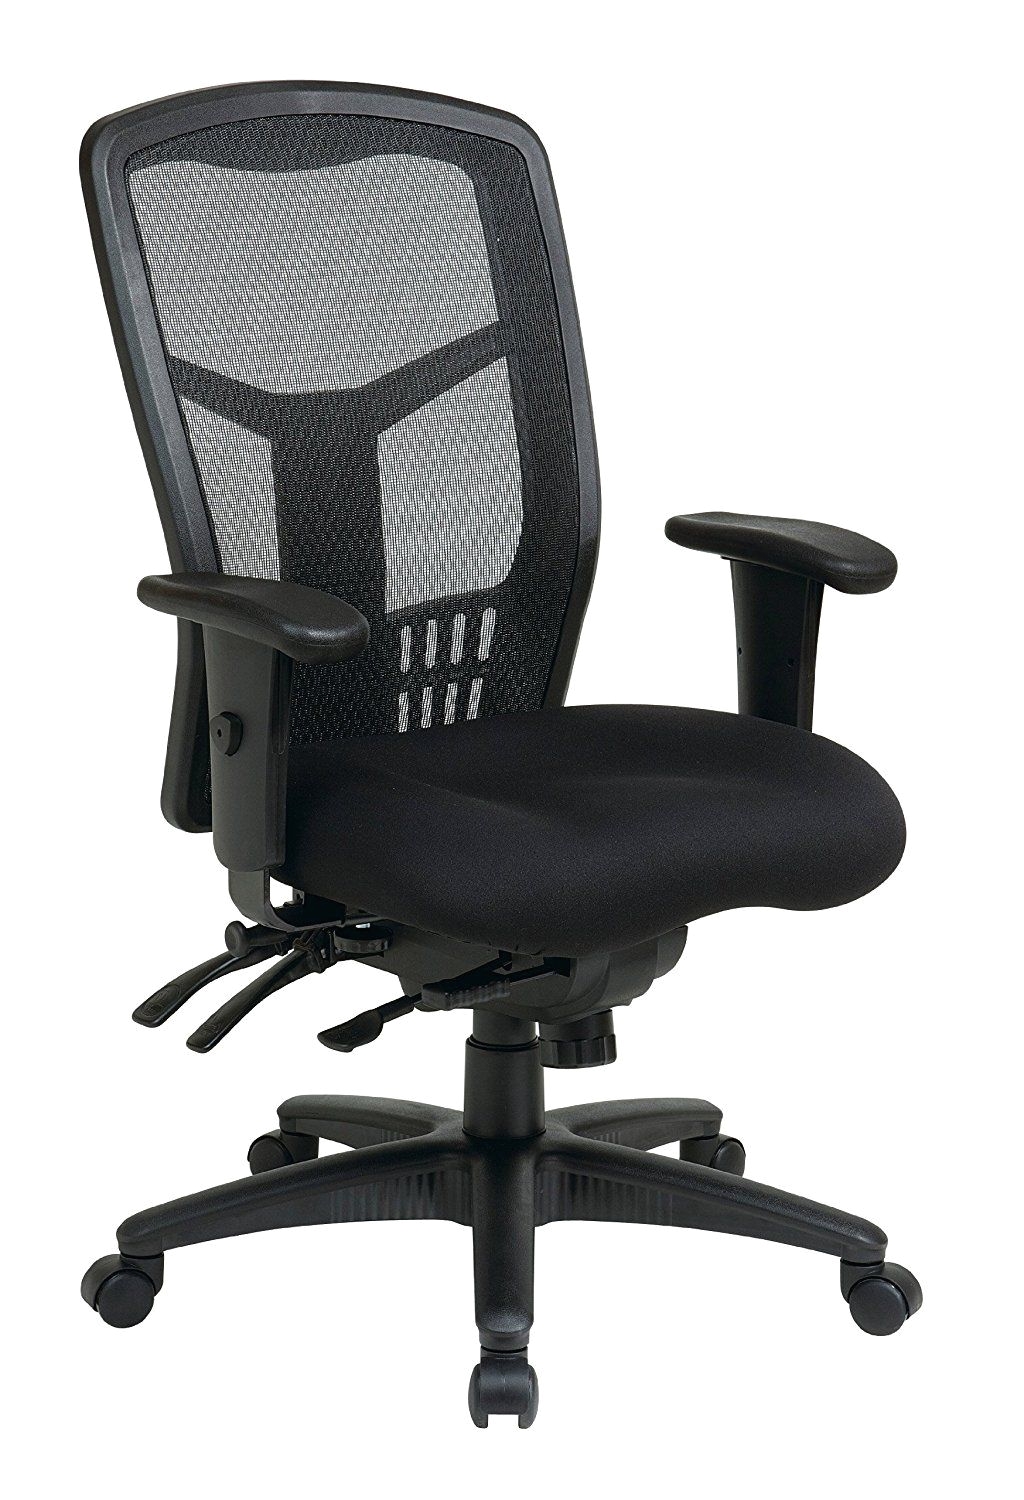 Best Office Chair for Tall Person with Back Pain the 7 Best Ergonomic Office Chairs to Buy In 2018